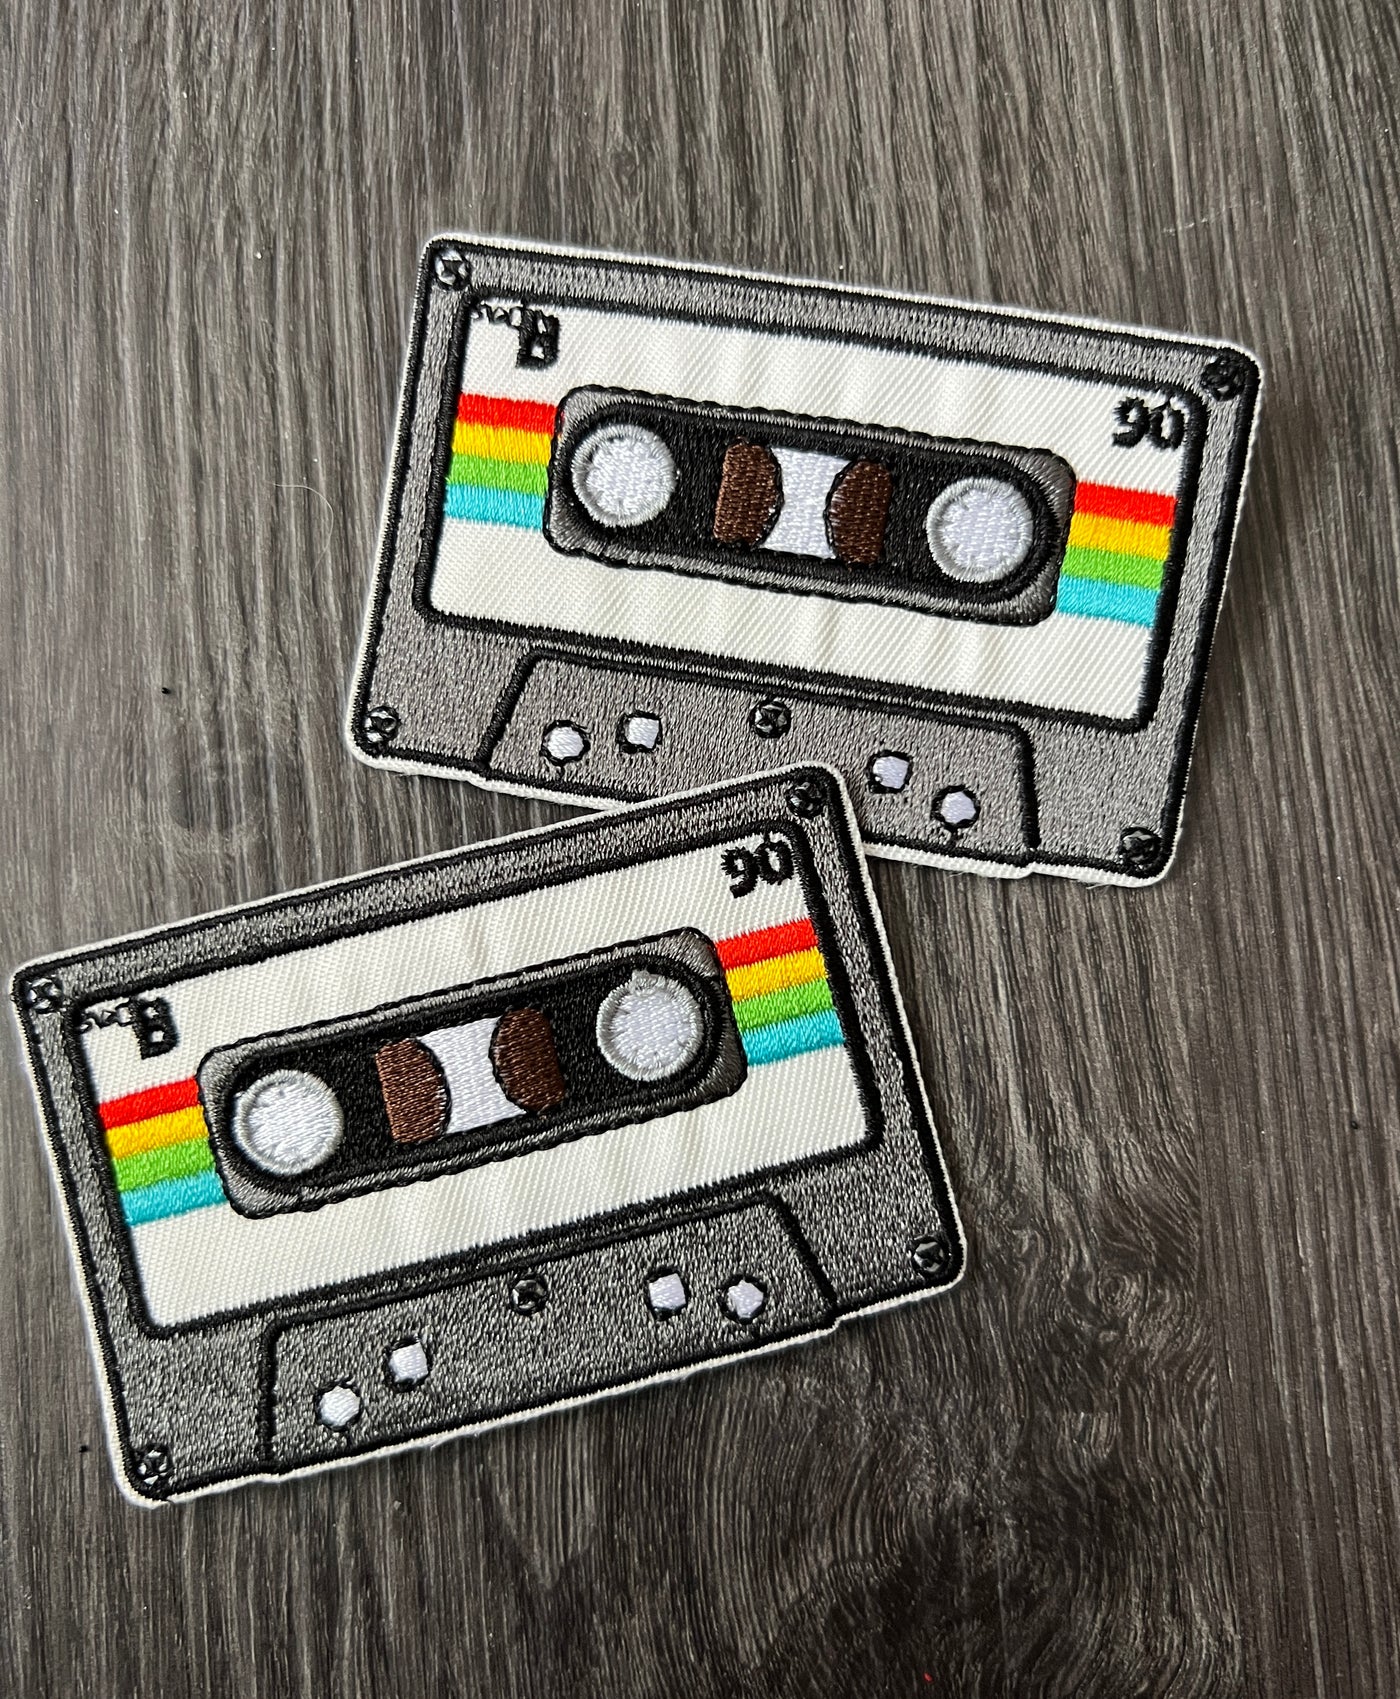 Popping Candy Shoe Clips - Rainbow Mix Tape